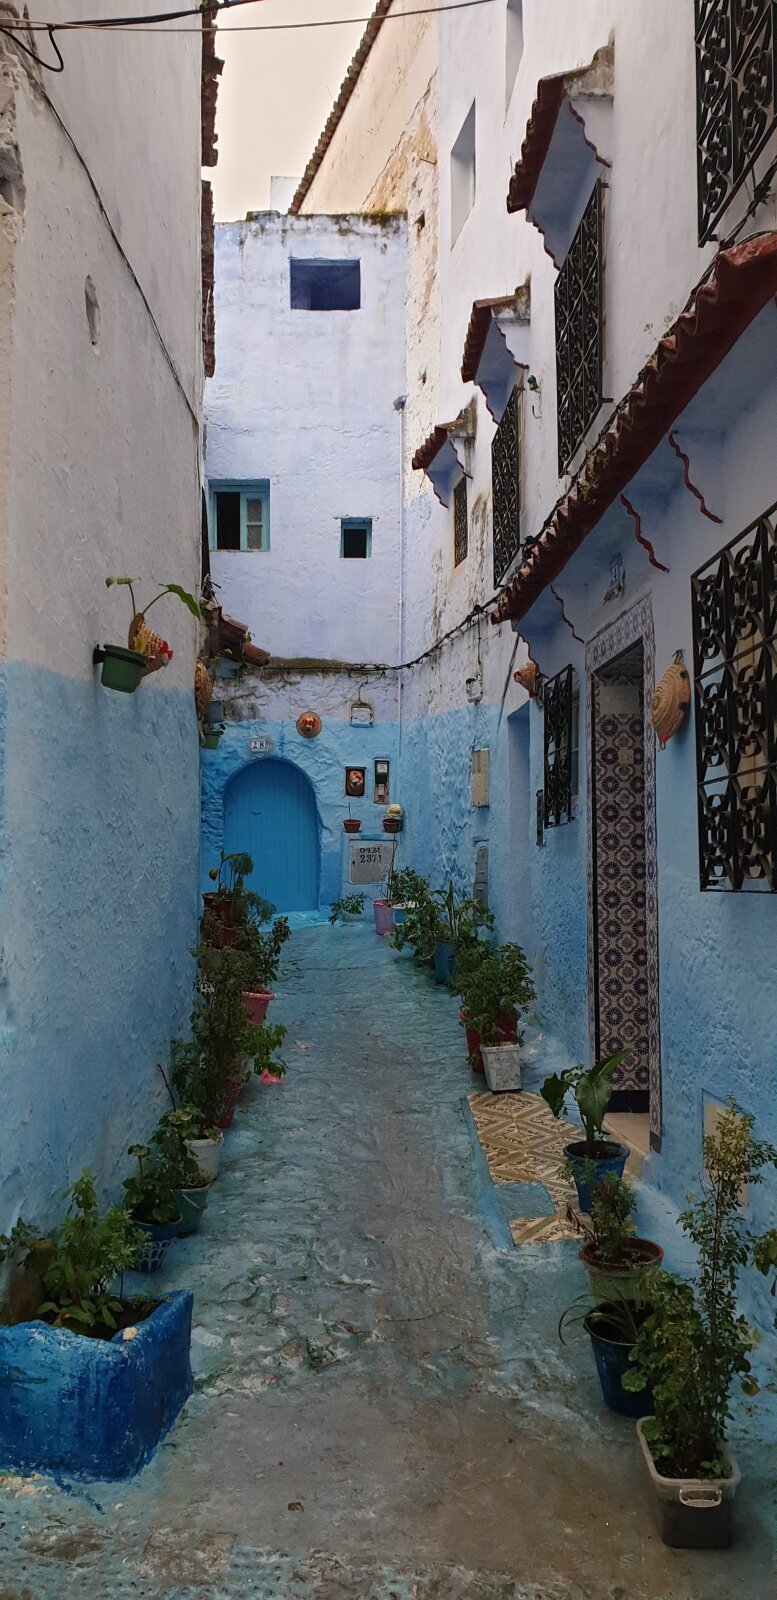 Chefchaouen: a day in the bluest city on the planet